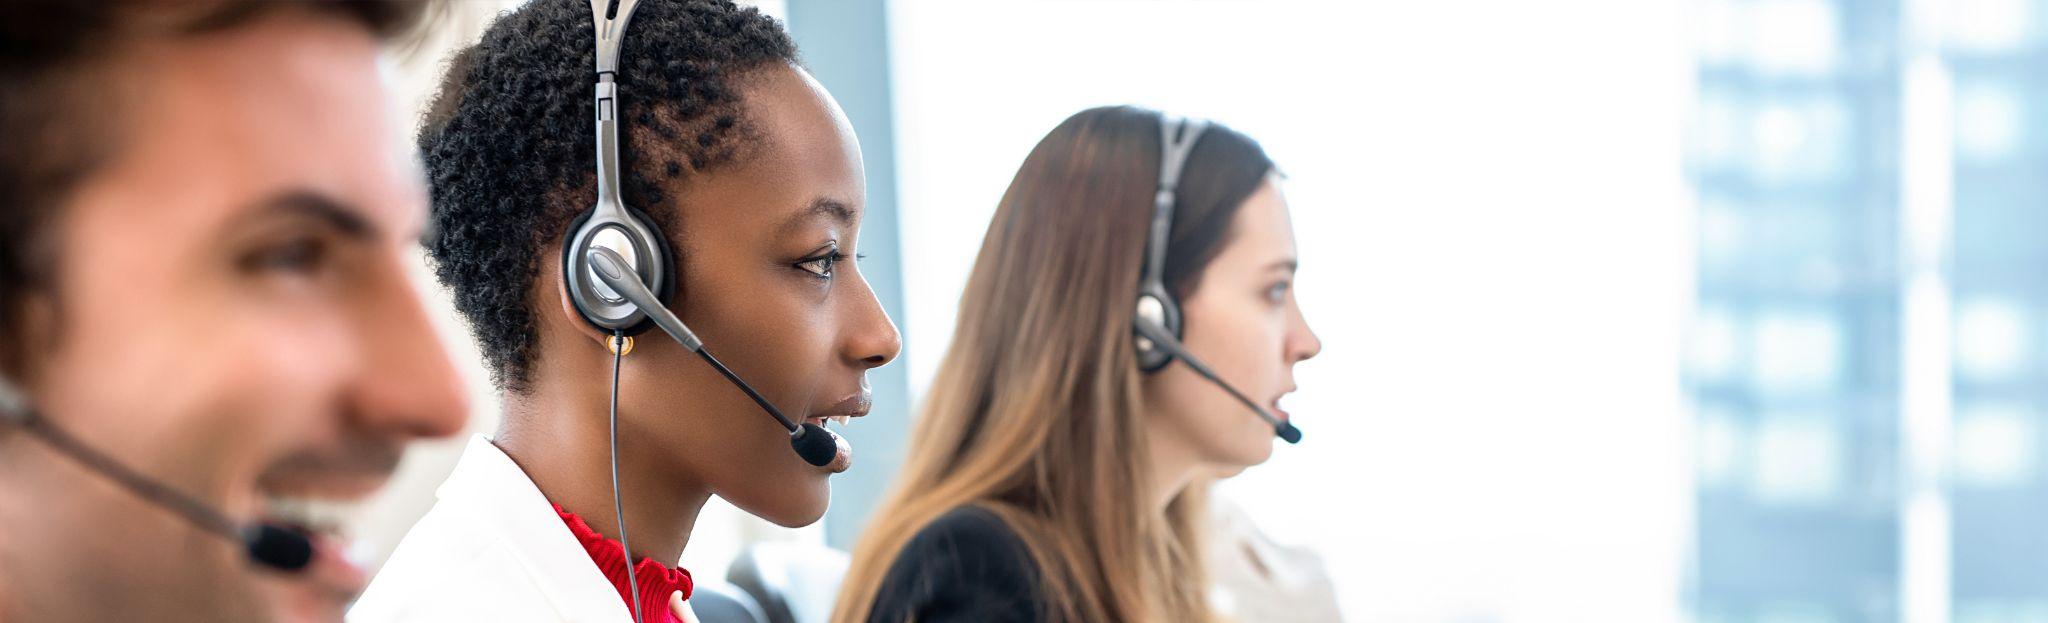 call centre employees are smiling and working